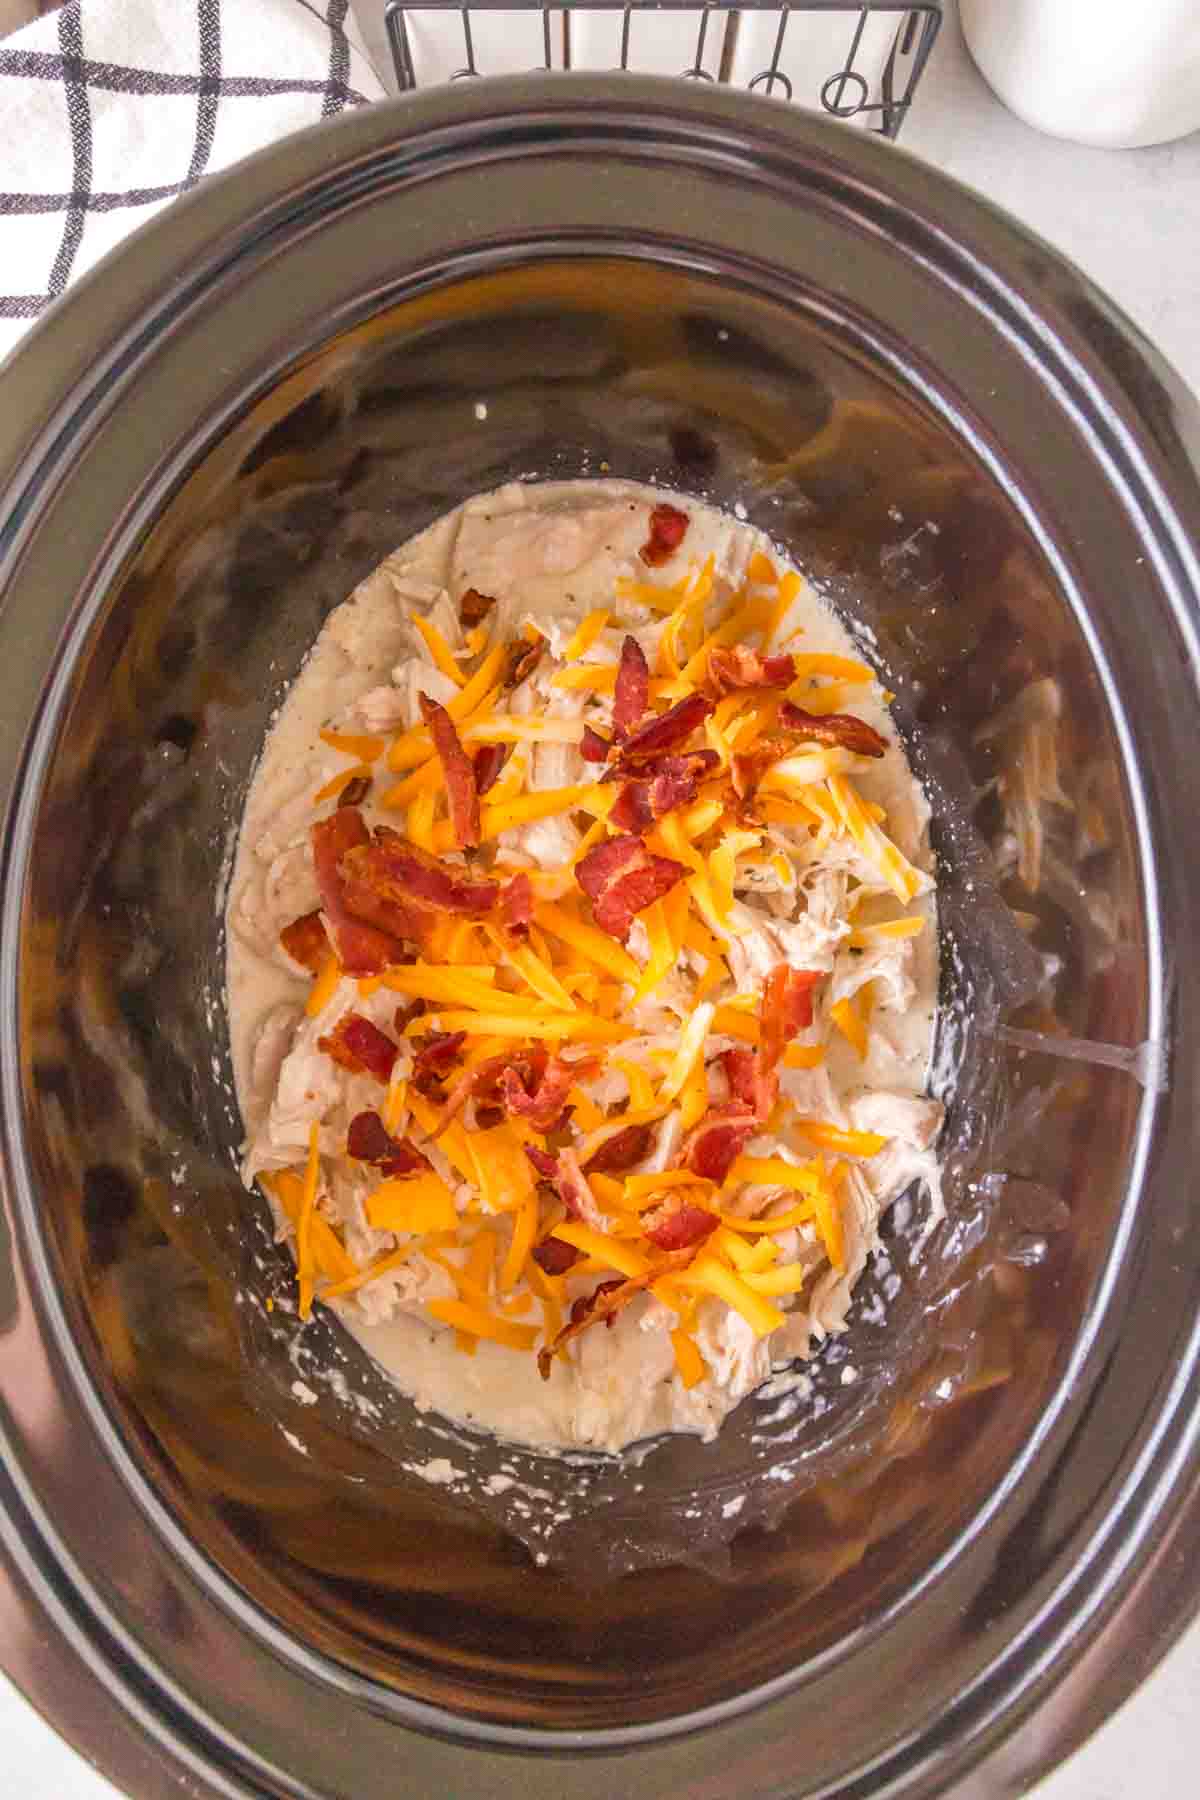 slow cooker with seasoned crack chicken inside shredded and sauced